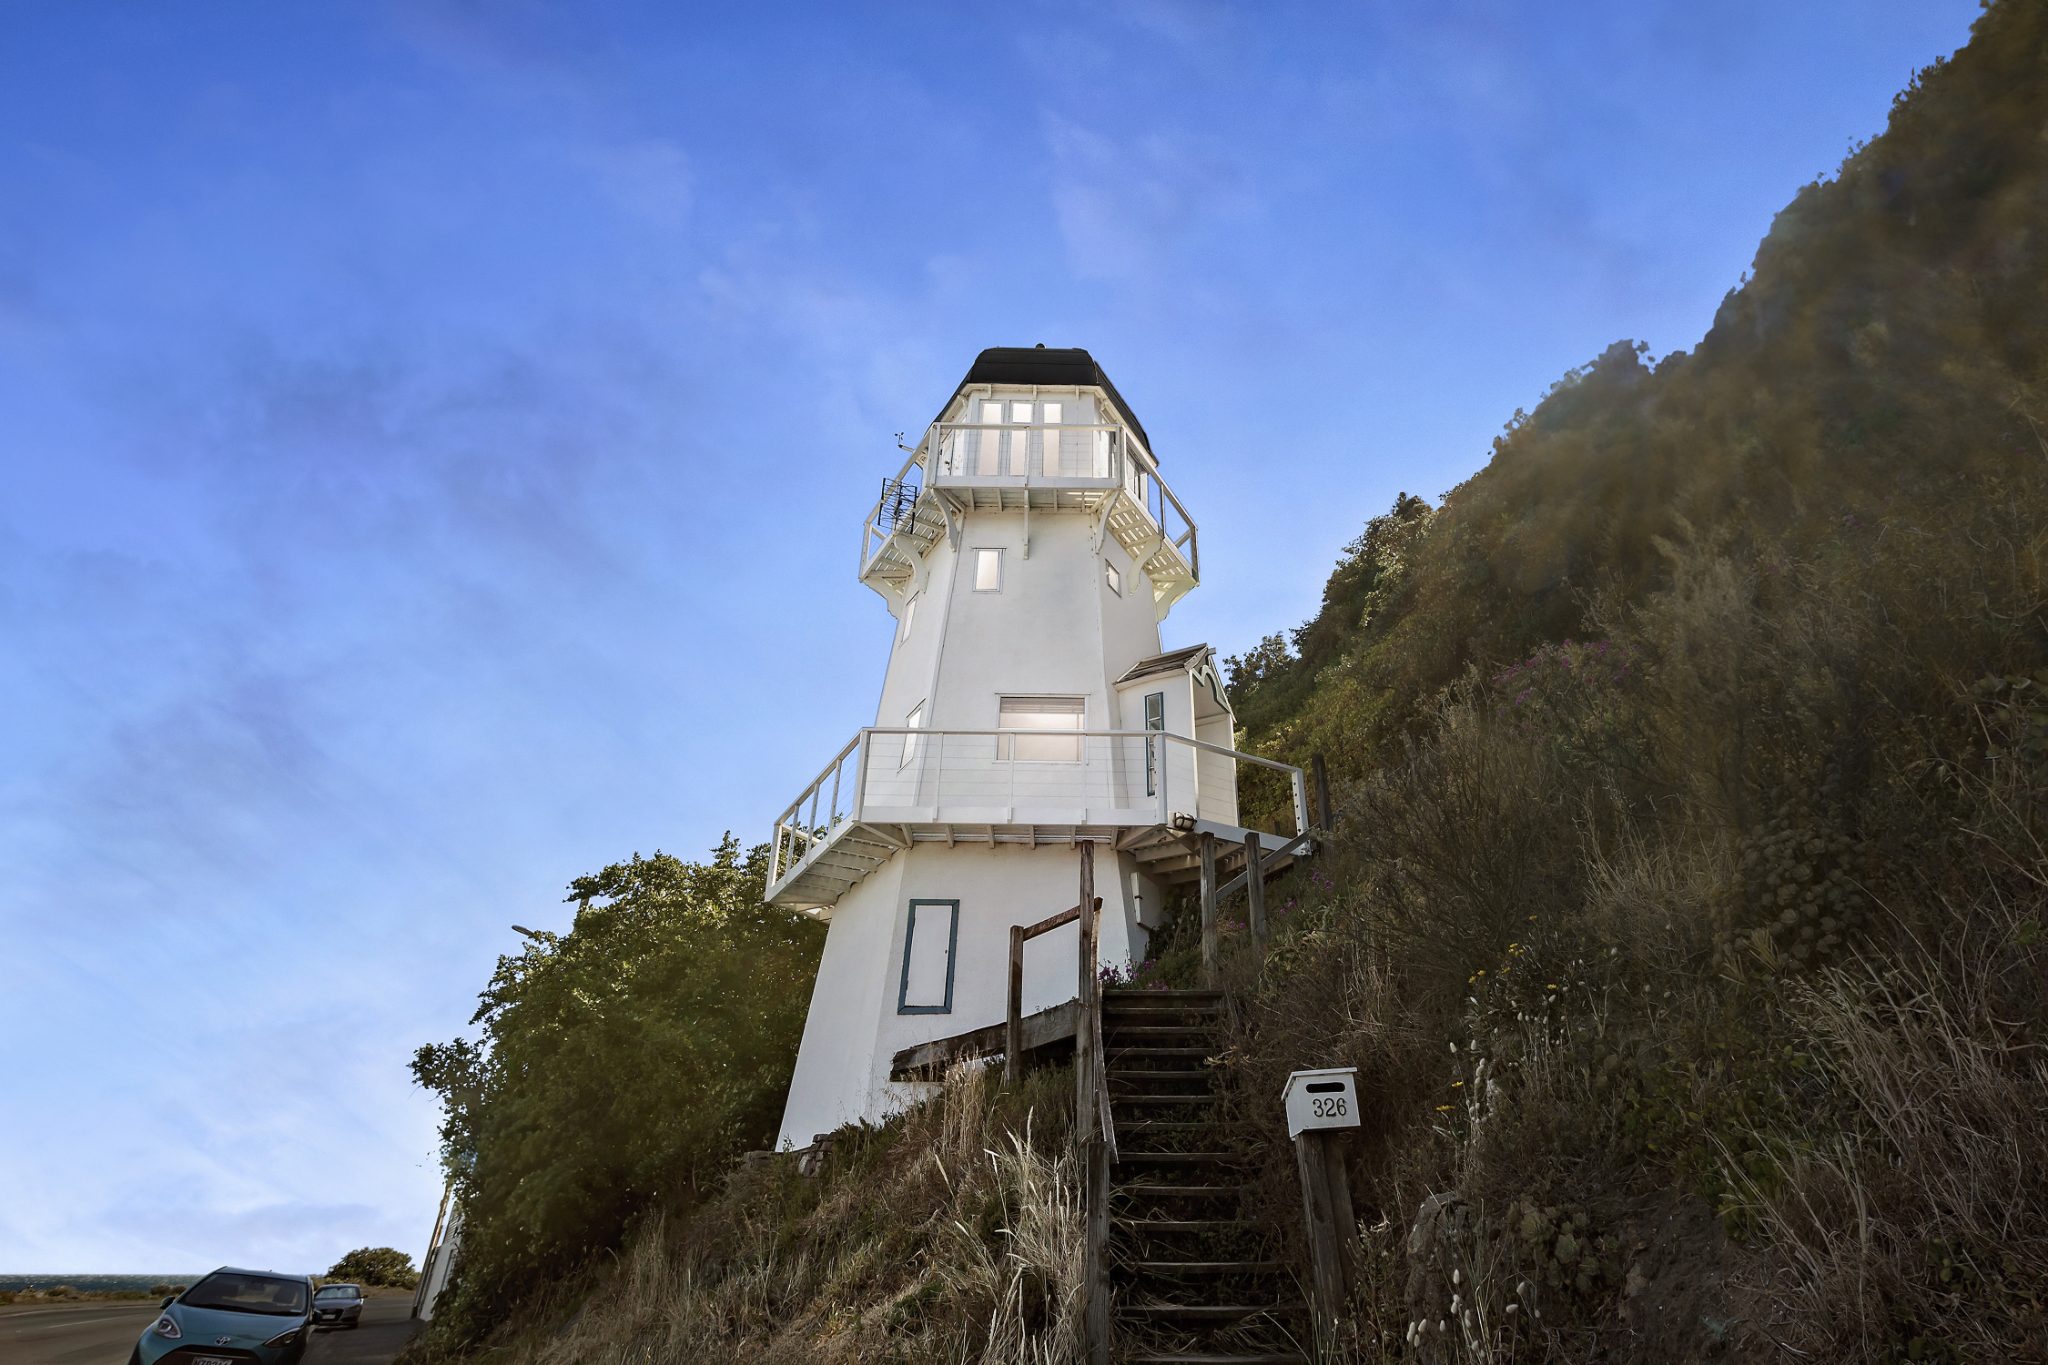 The Island Bay lighthouse as seen from the road